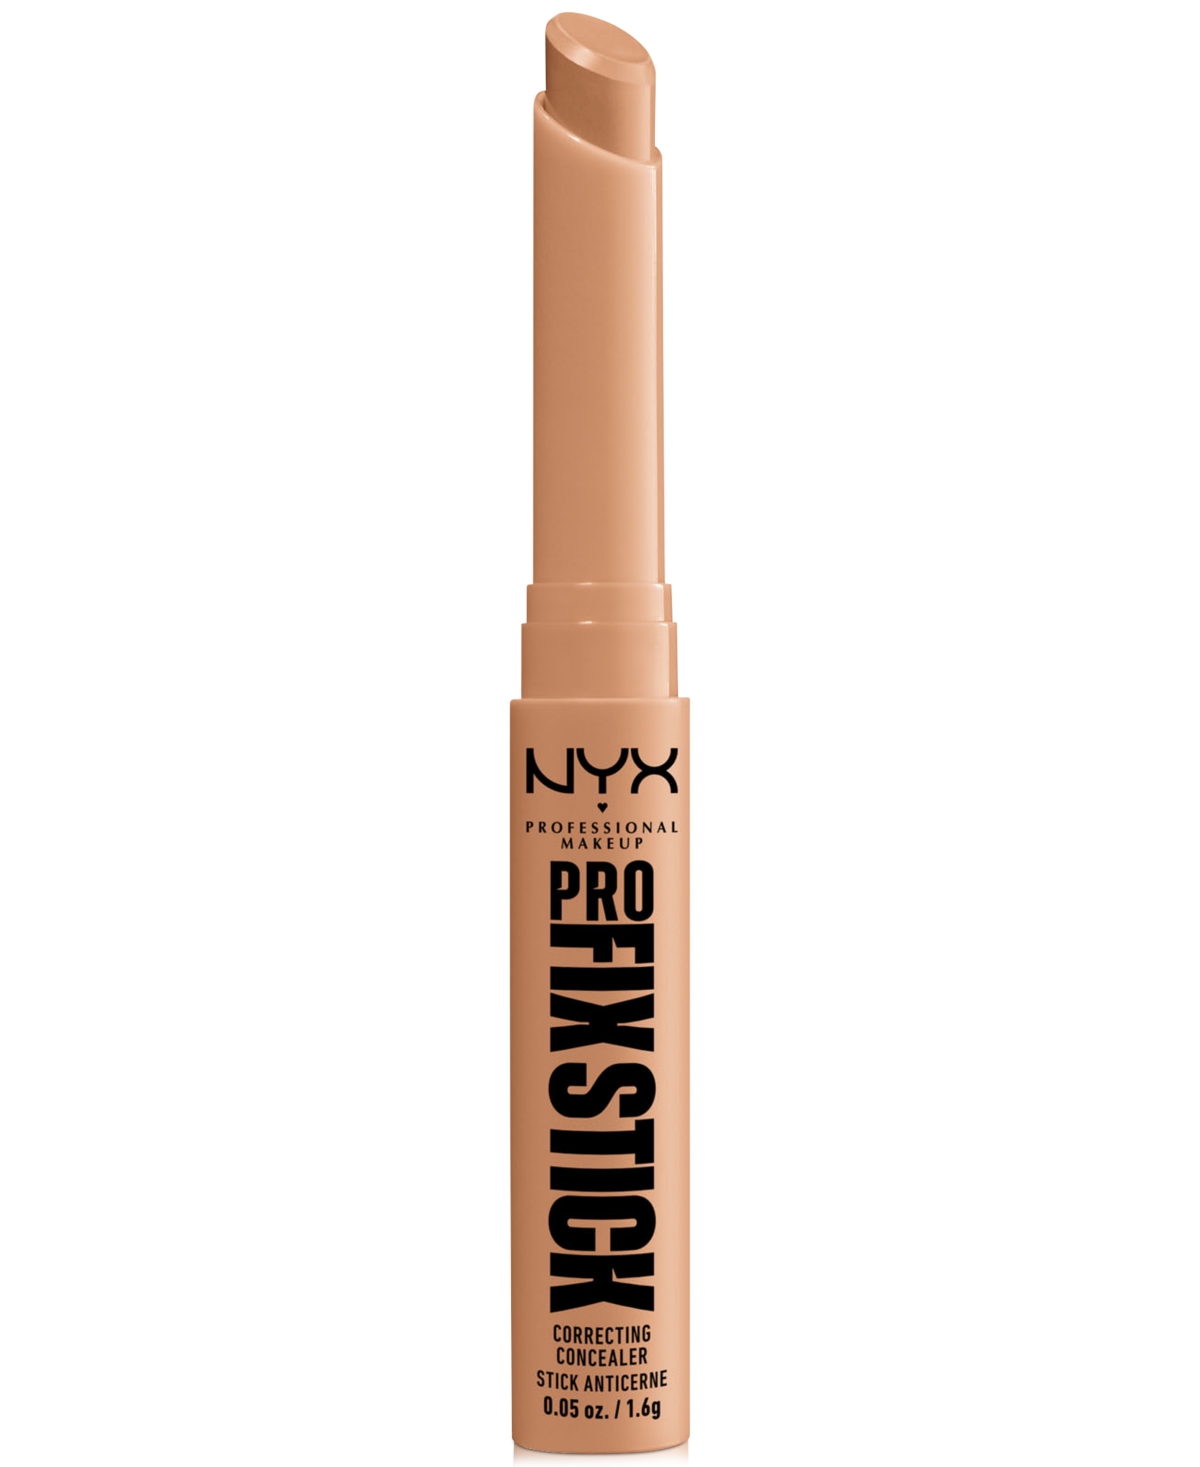 Nyx Professional Makeup Pro Fix Stick Correcting Concealer, 0.05 Oz. In Neutral Tan